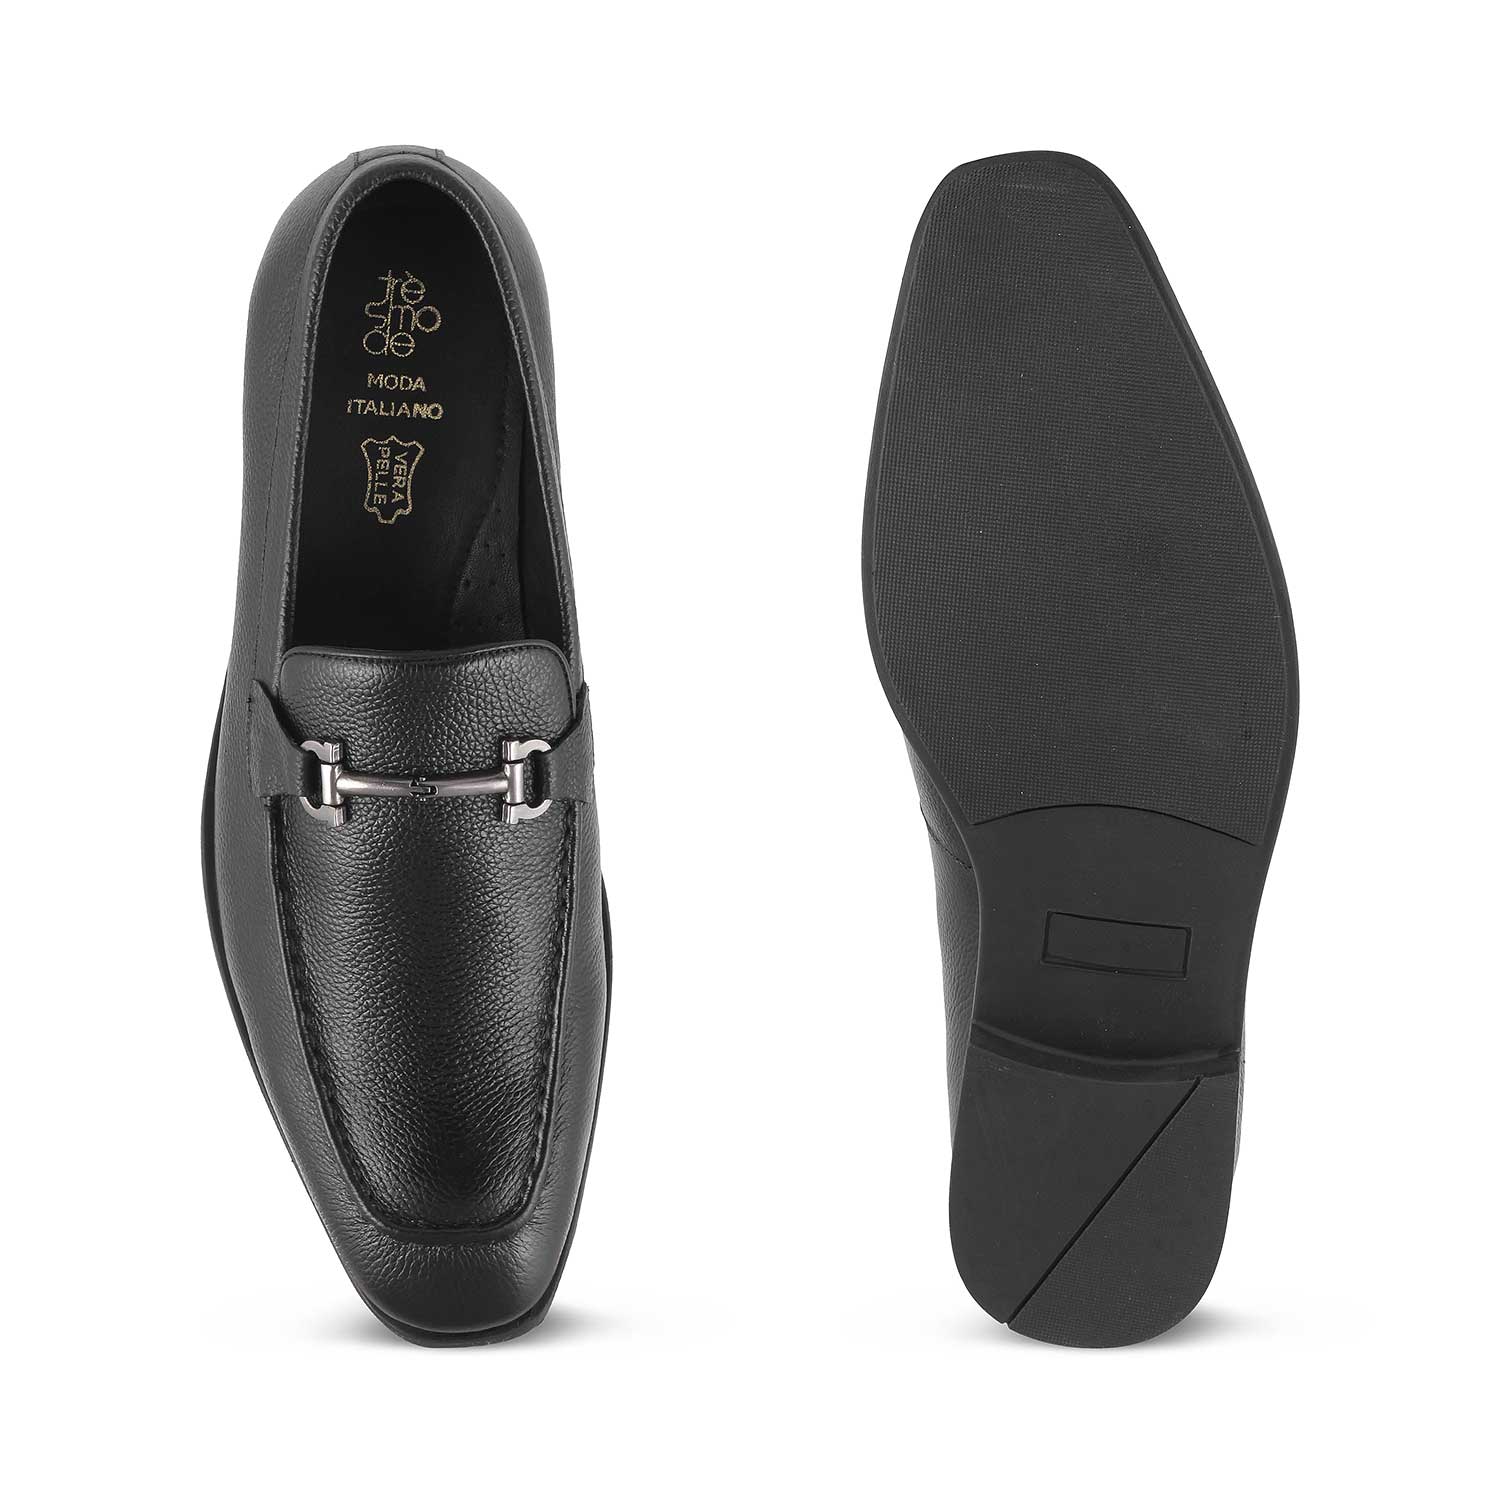 The Tumac Black Men's Leather Loafers Tresmode - Tresmode